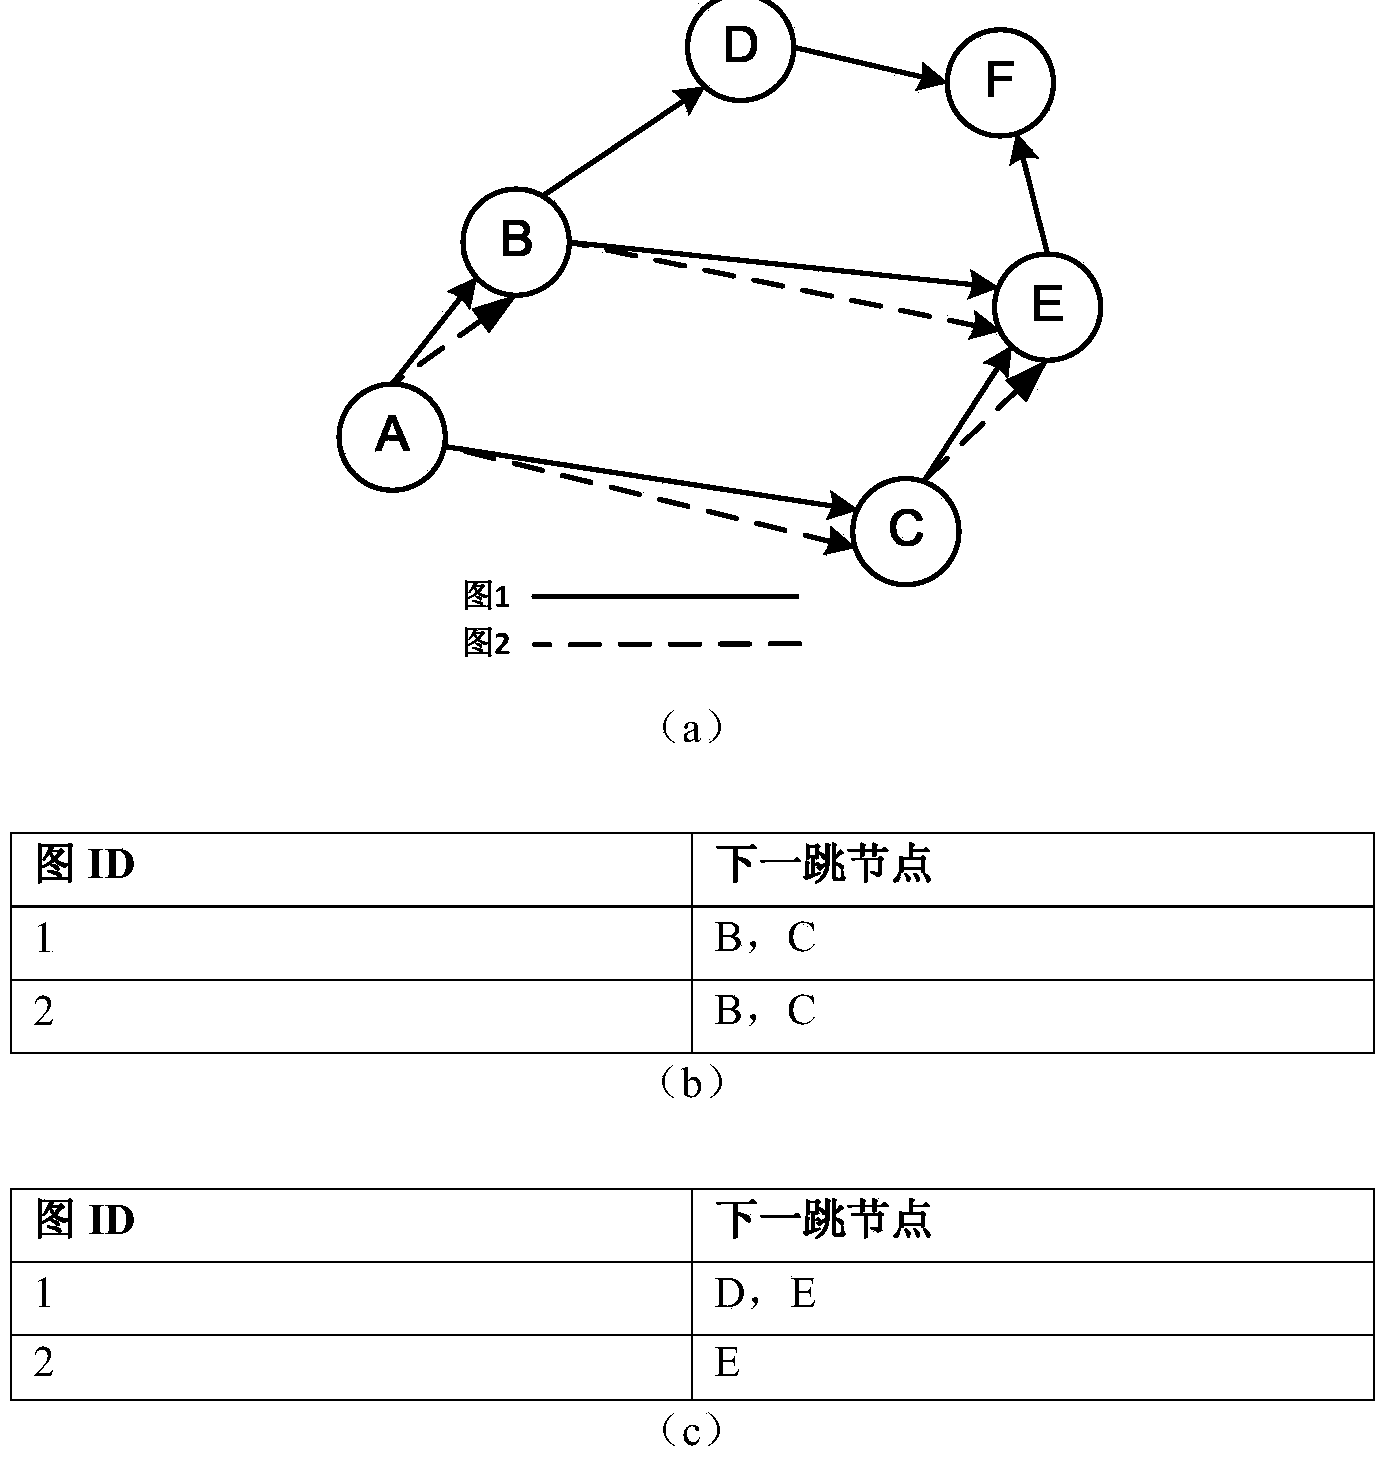 Resource leveling multi-path routing method applicable to industrial wireless sensor network